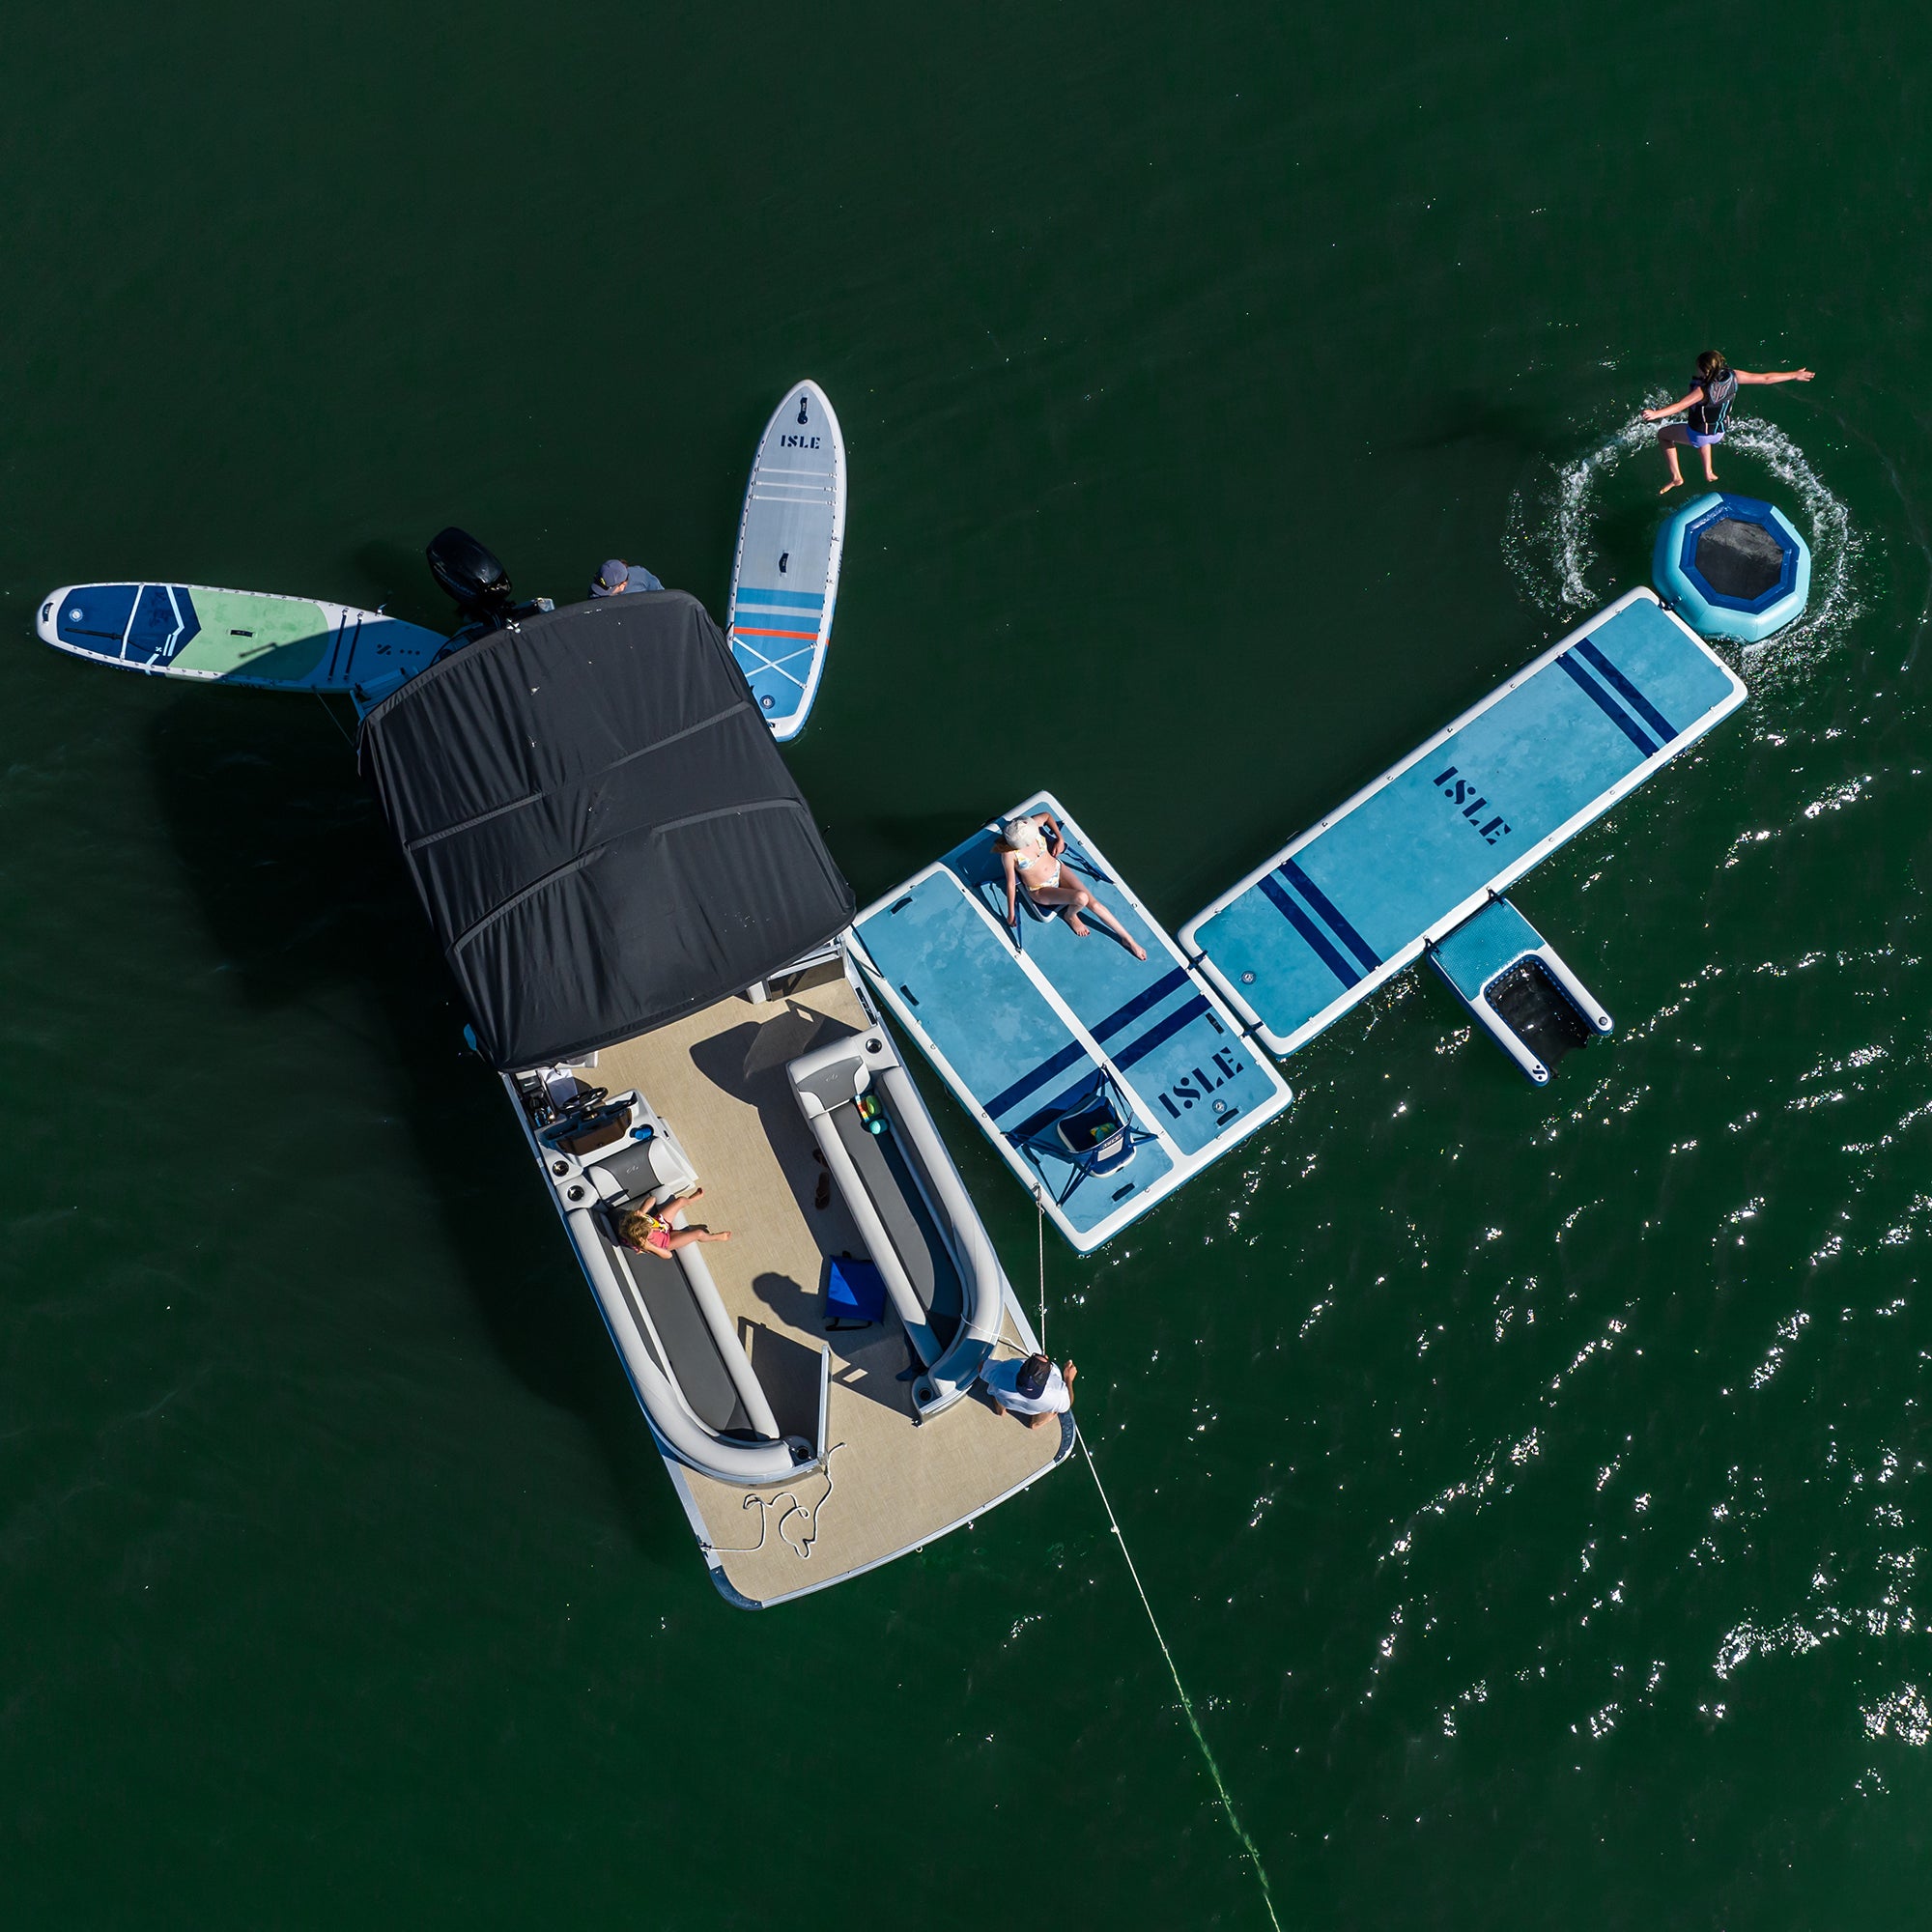 Runway Dock & Air Track Being Used As An Inflatable Dock